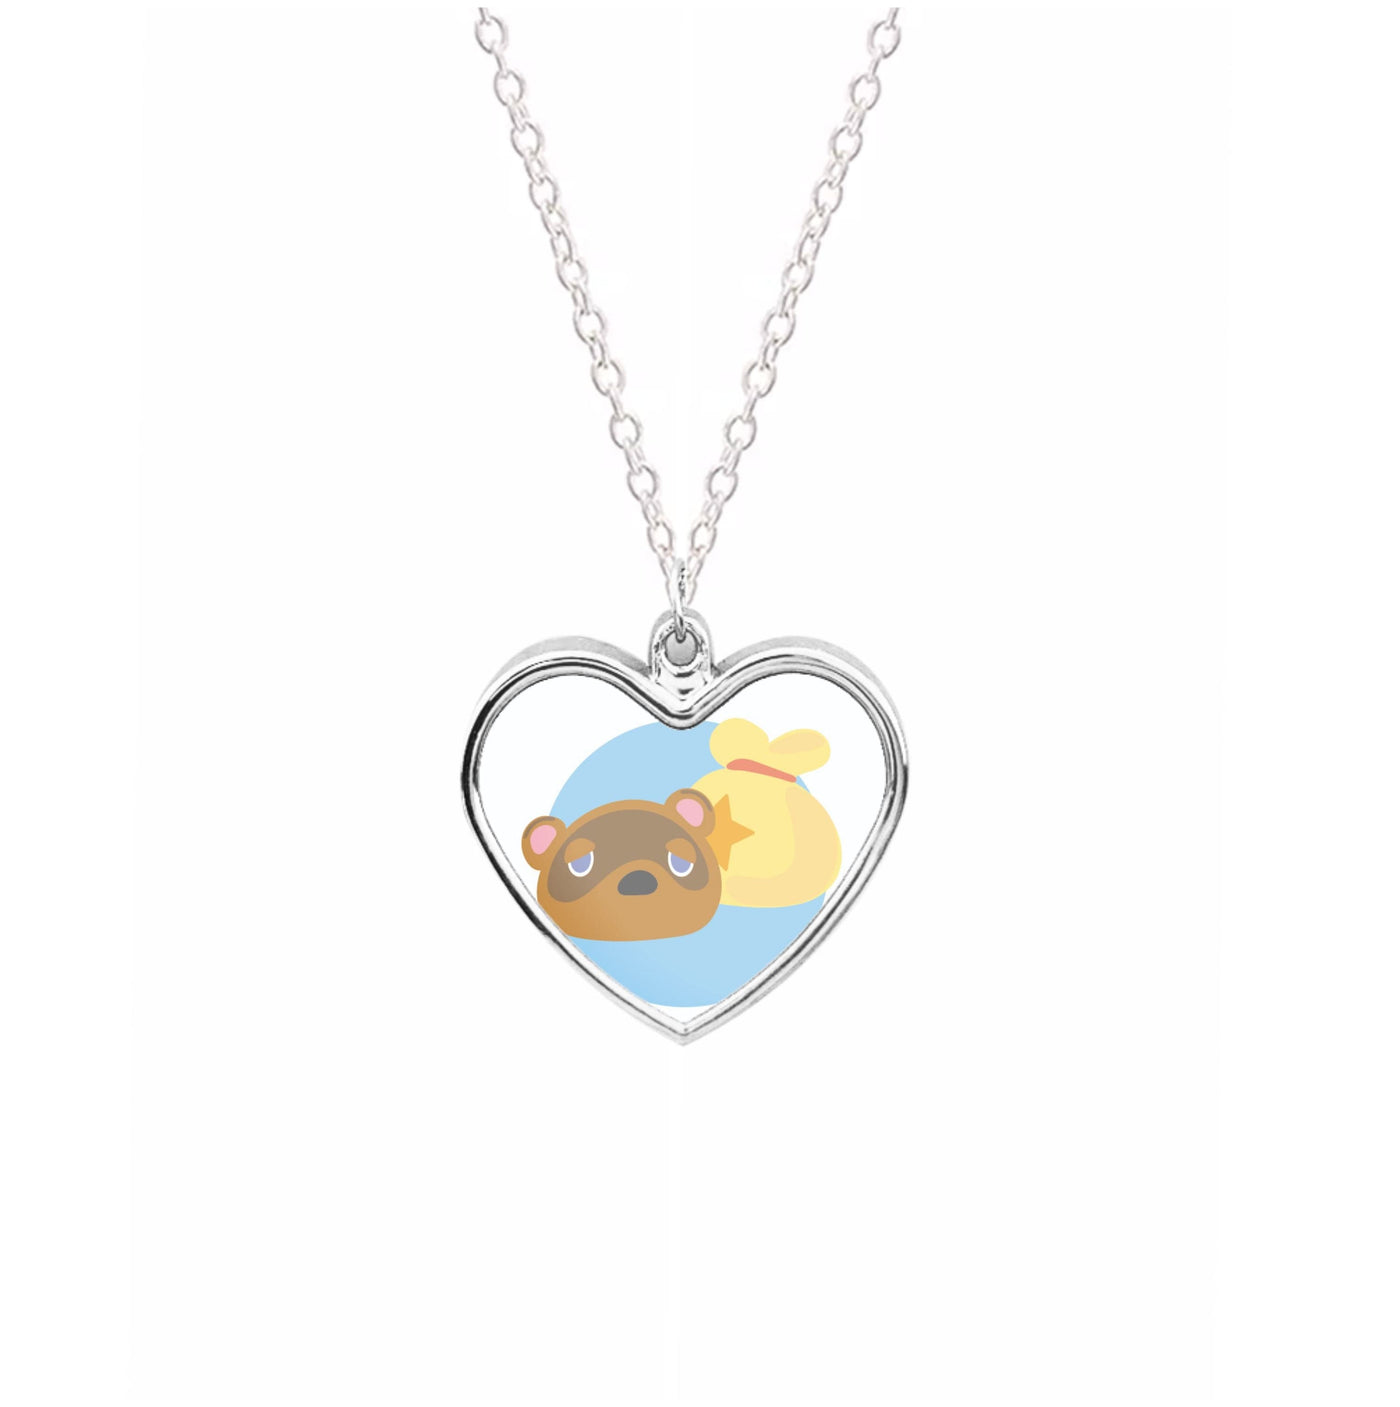 Tom - Animal Crossing Necklace